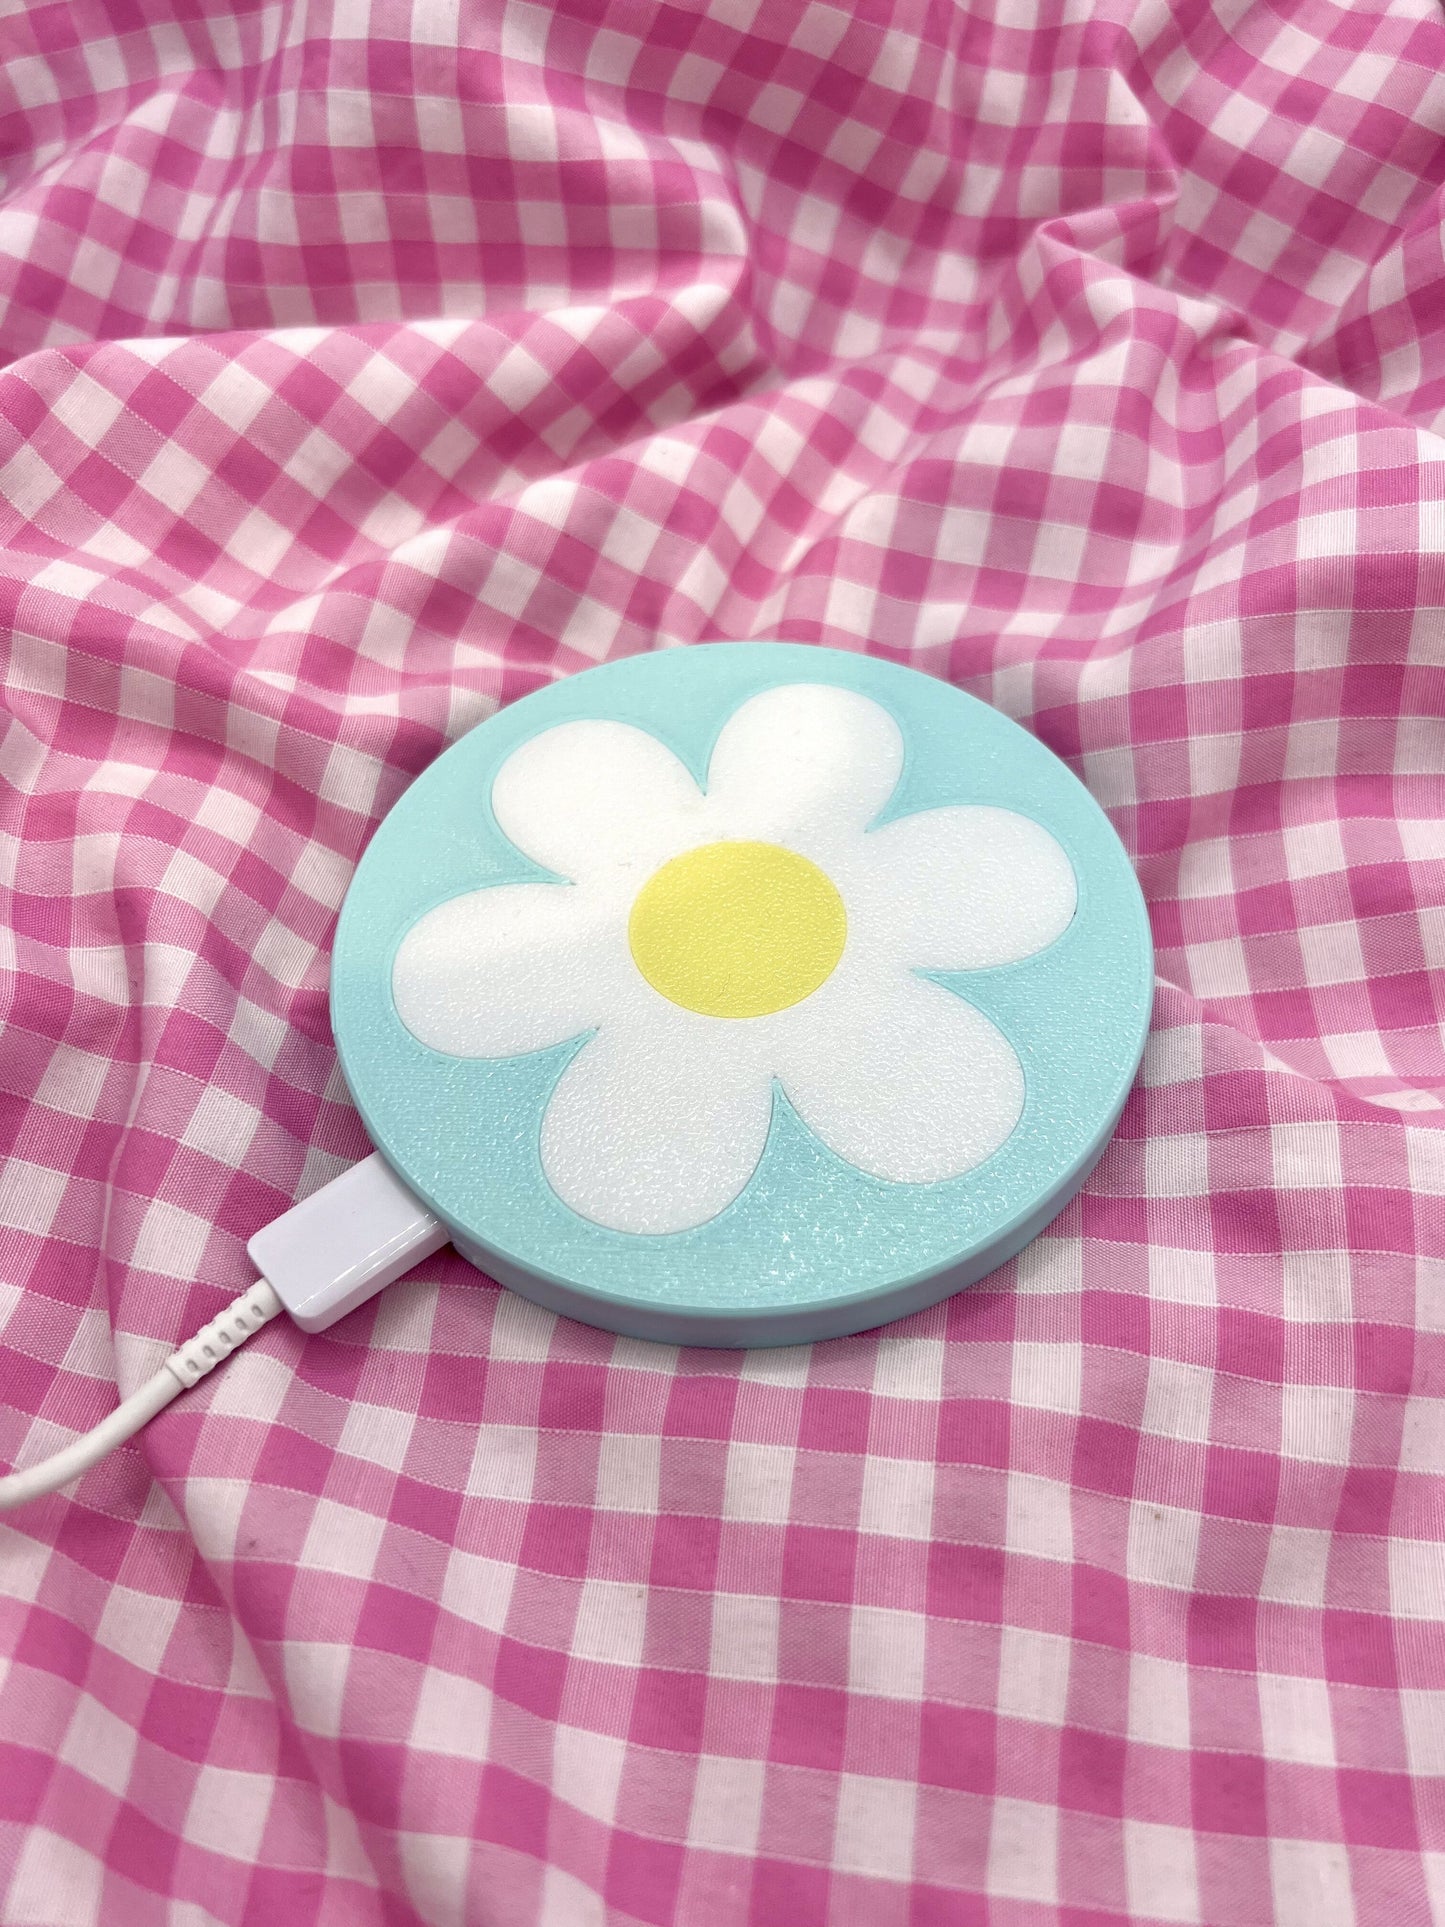 Daisy Wireless Phone Charger